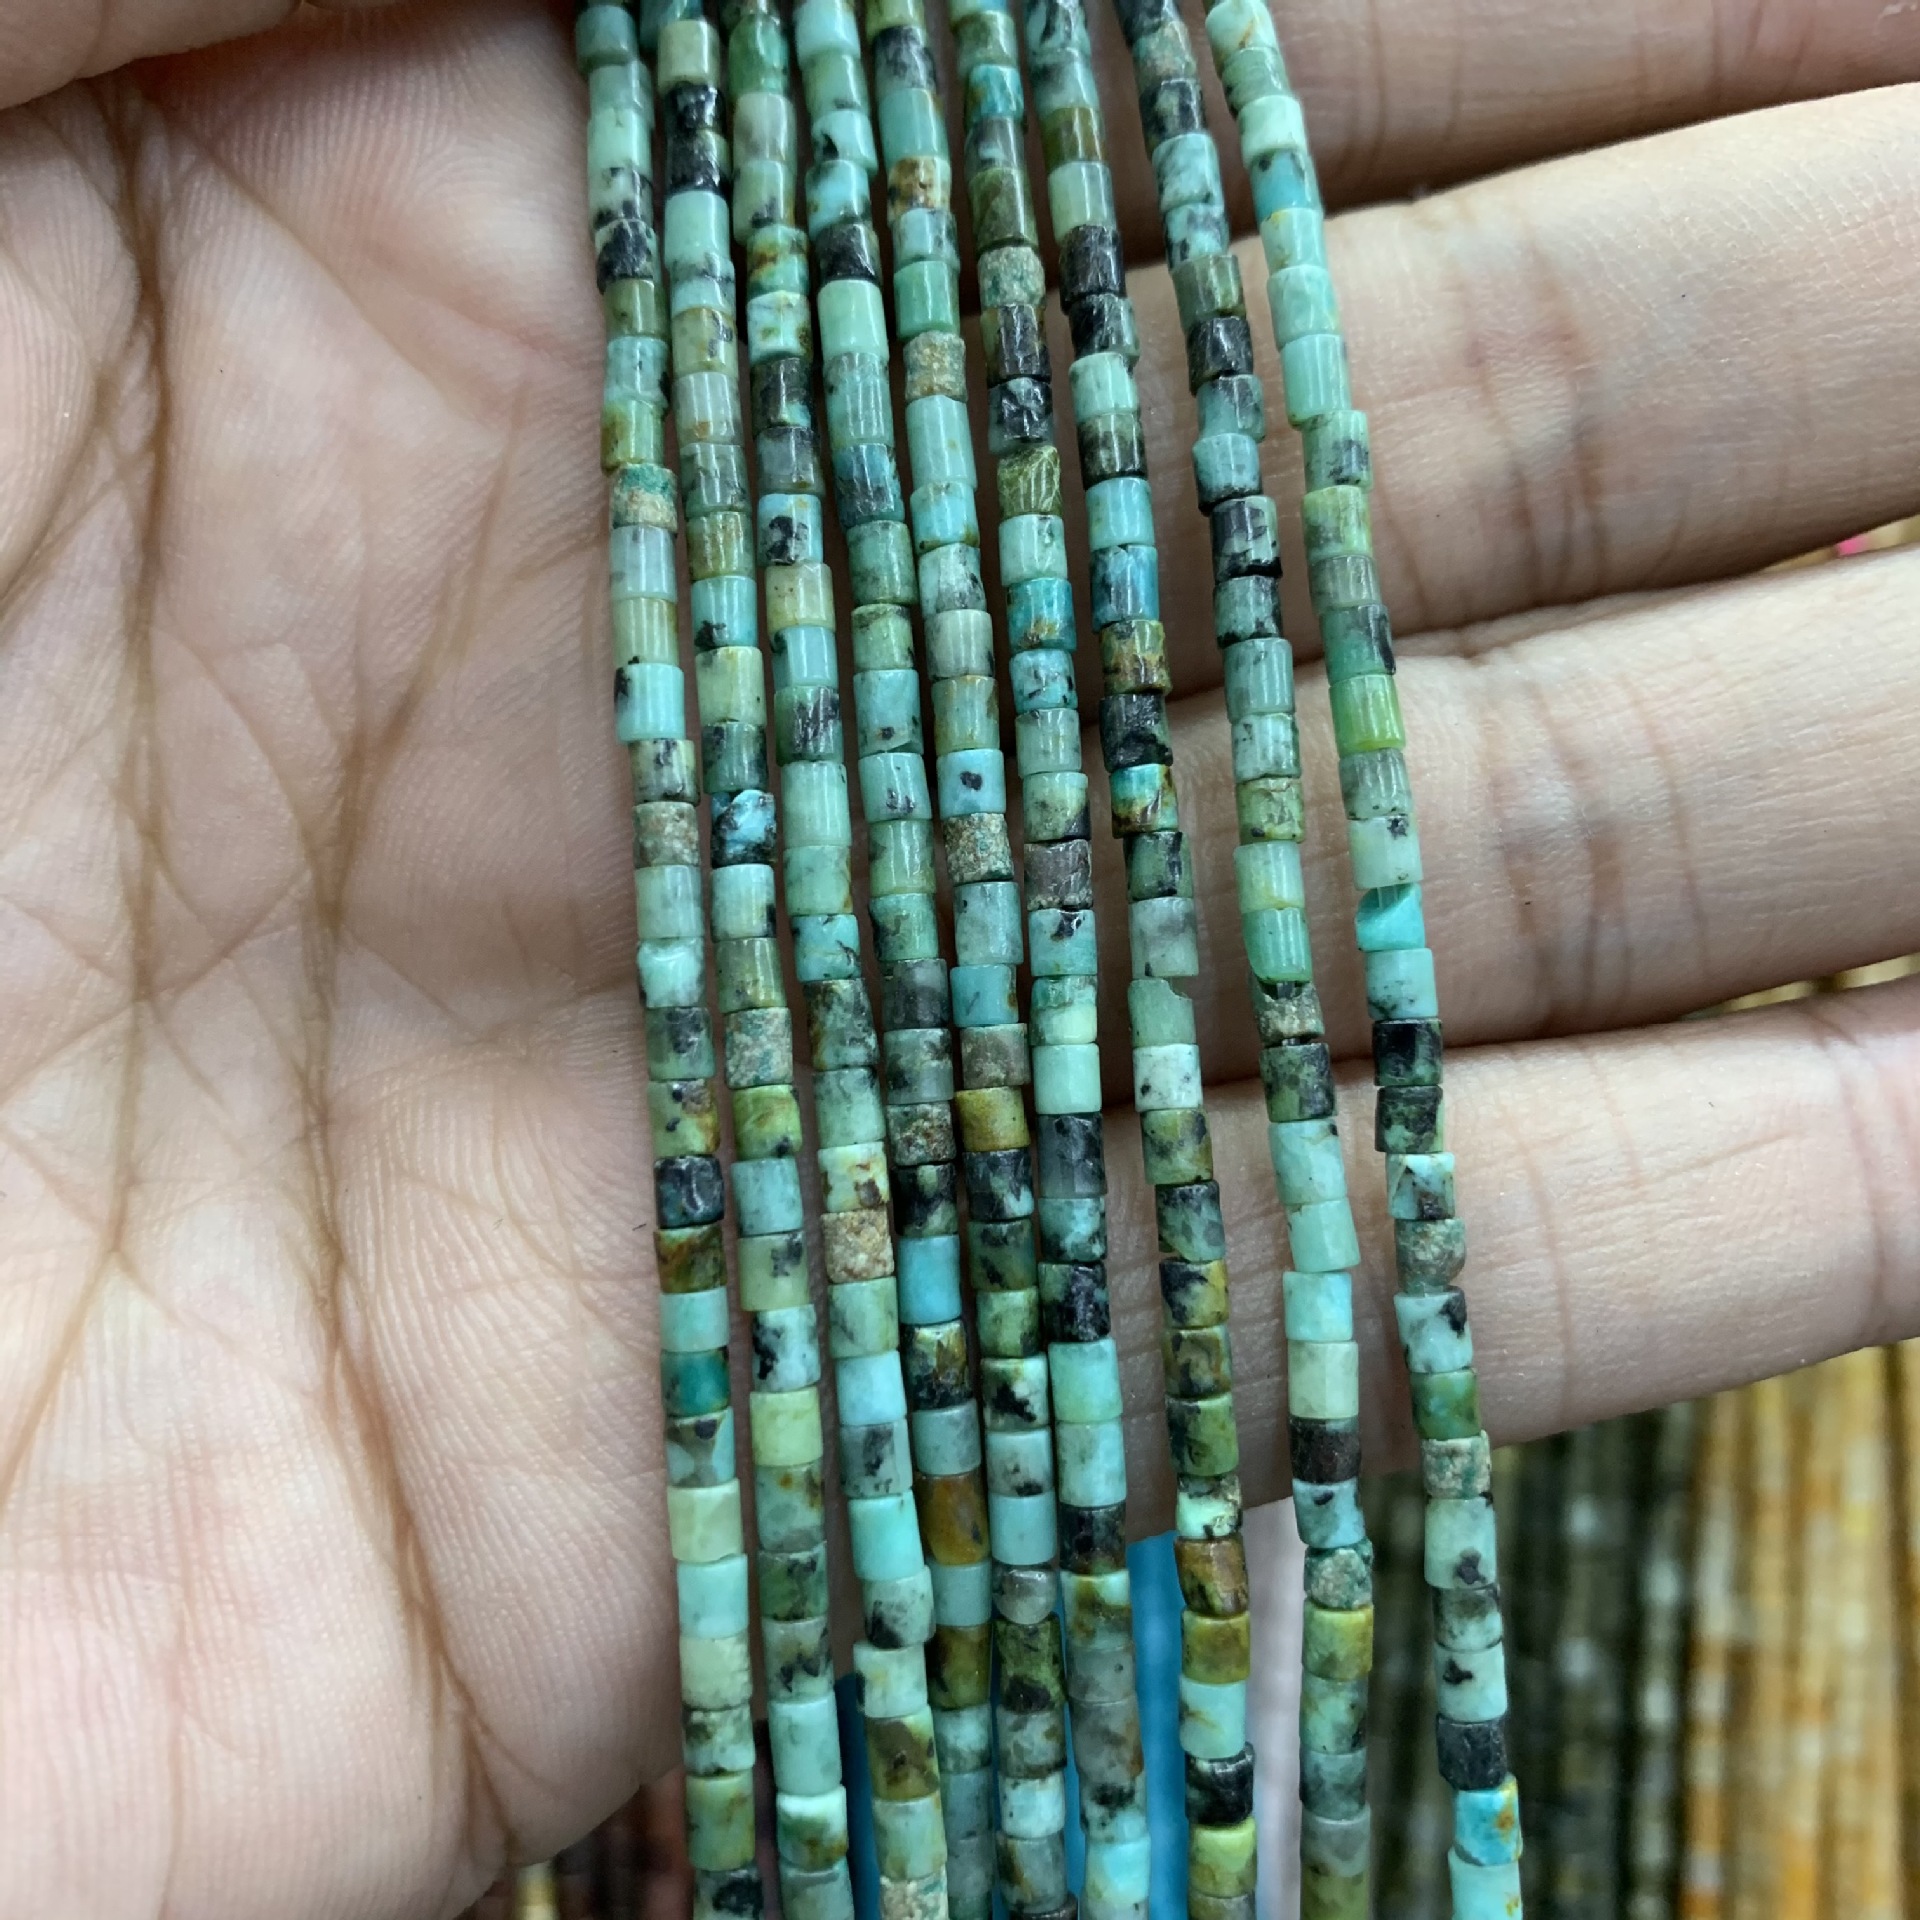 3:African turquoise